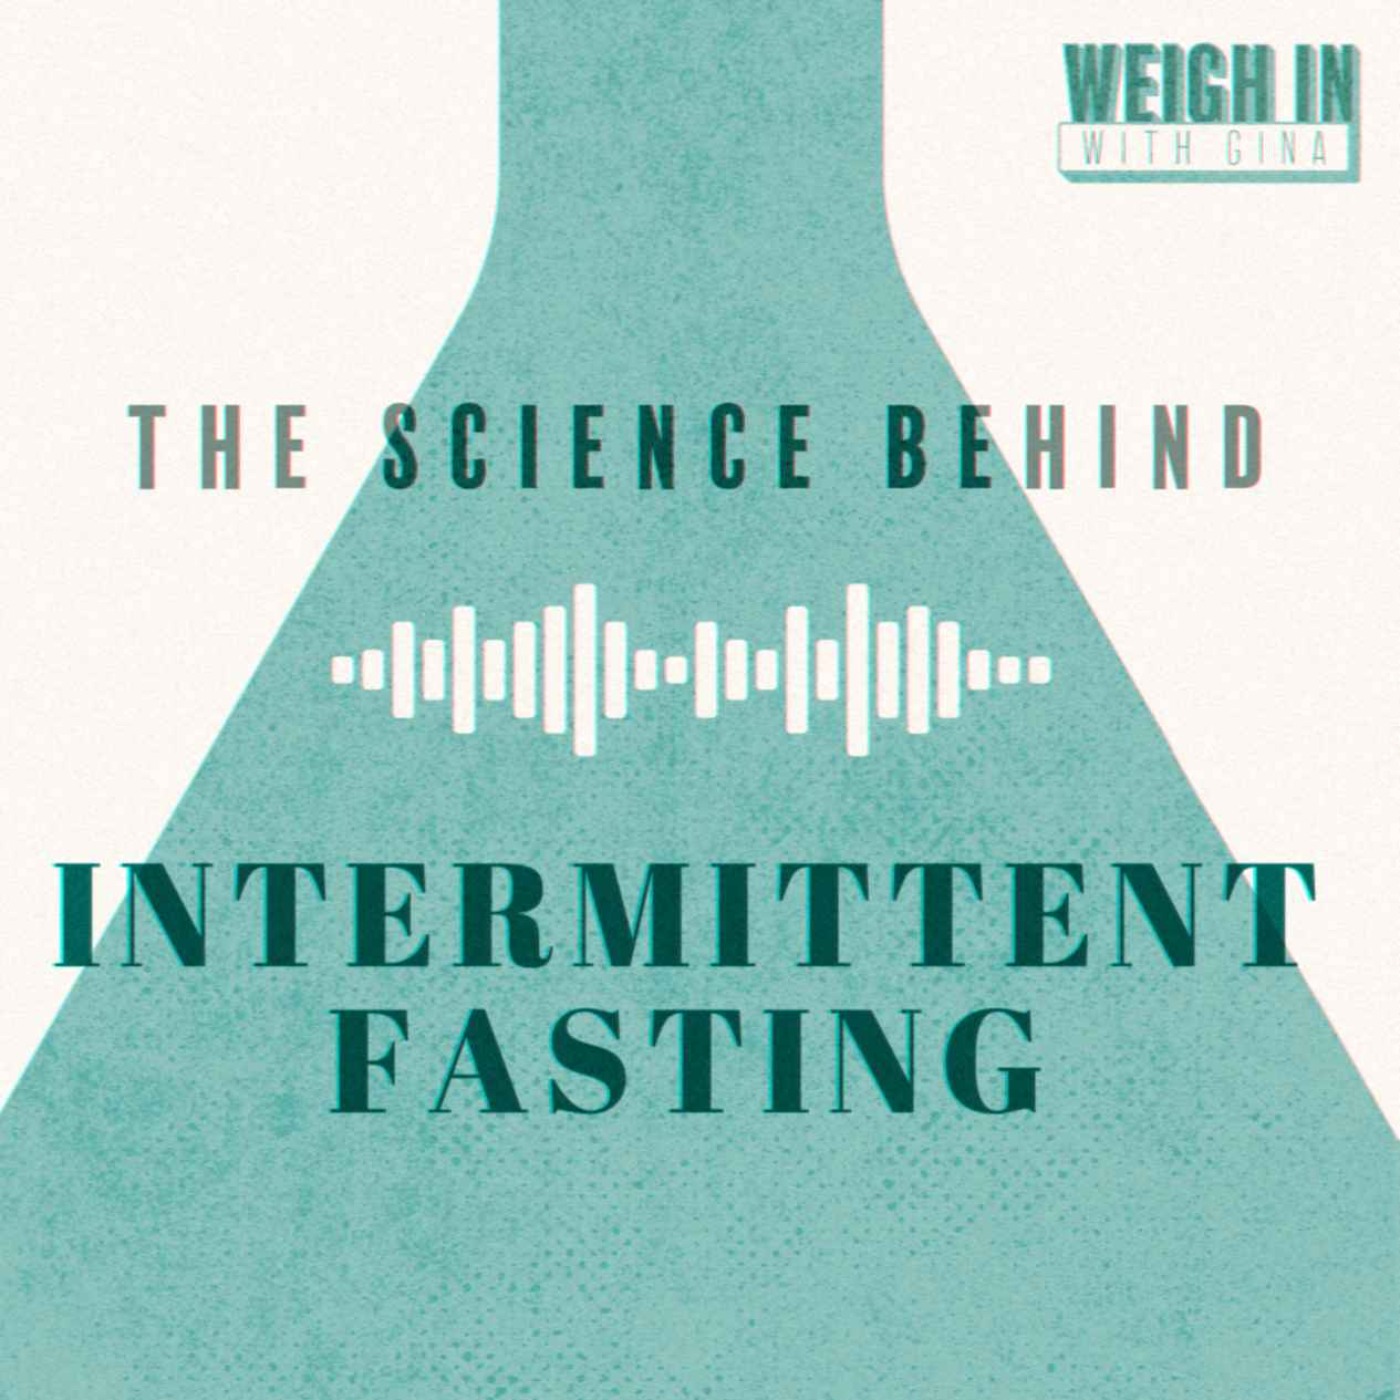 The Science Behind: Intermittent Fasting